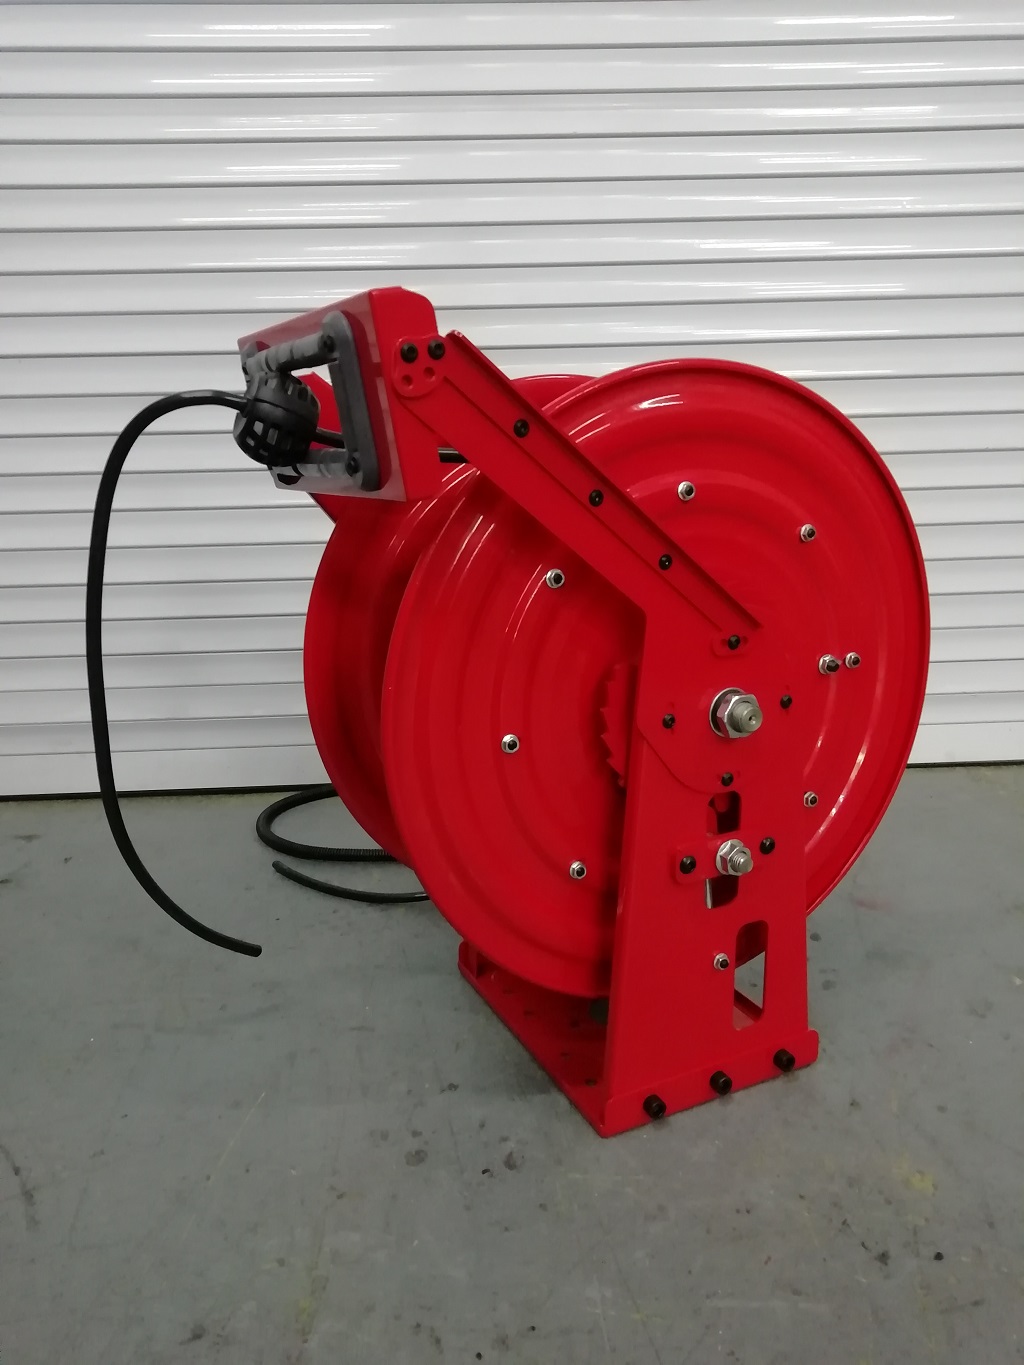 Oil Hose Reels - Hose, Cord and Cable Reels - Reelcraft